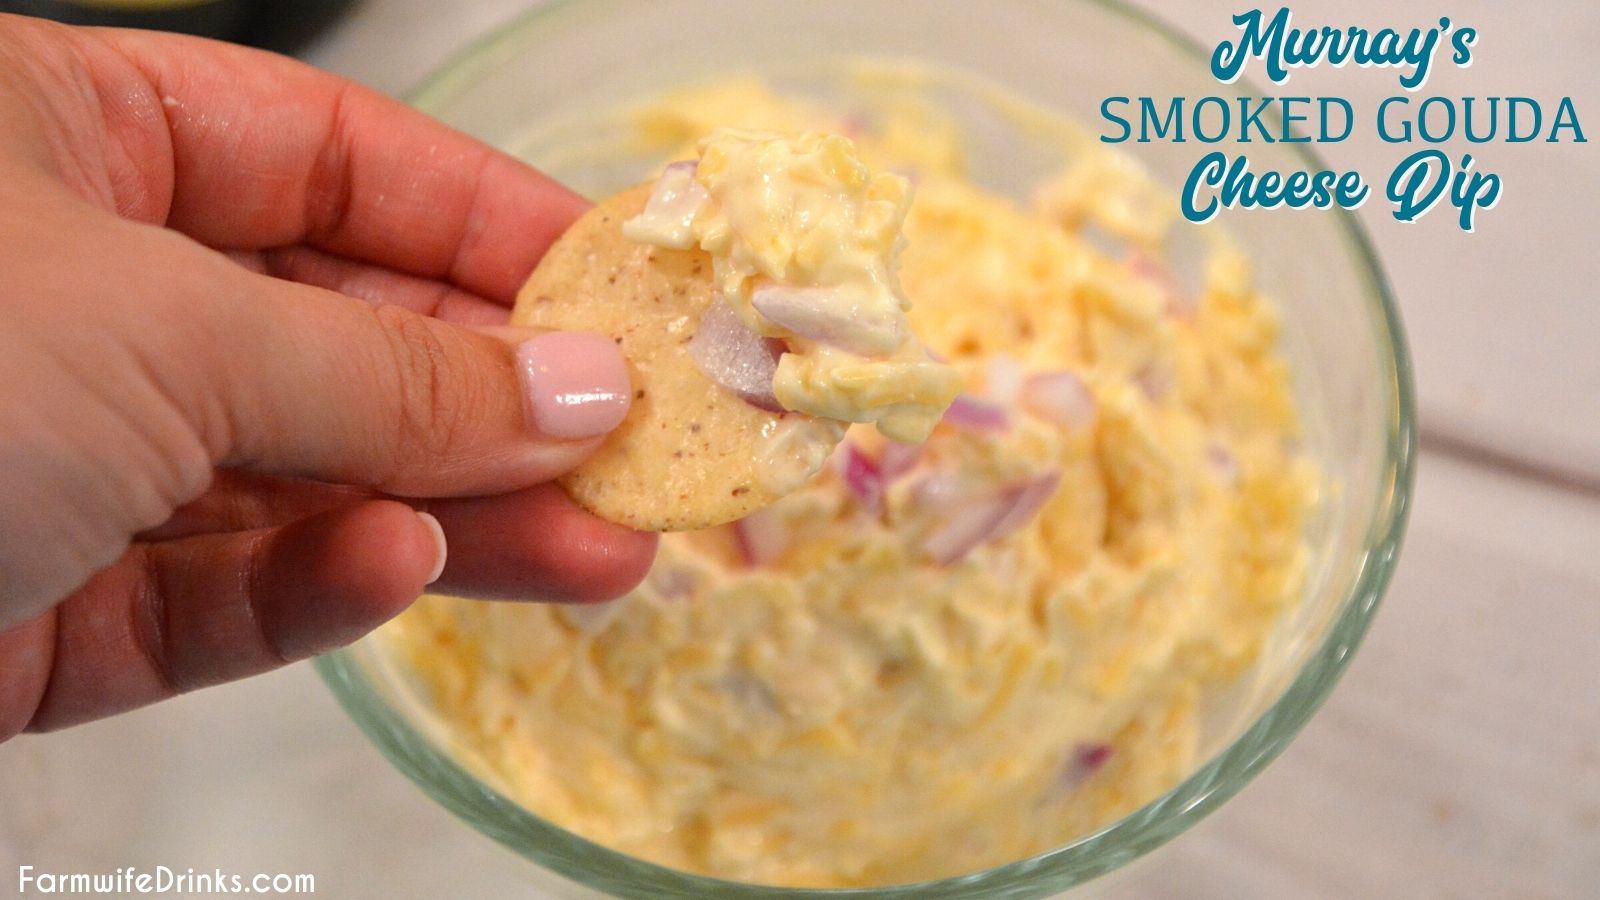 Murray's smoked gouda cheese dip is a simple cheese dip recipe using 4 simple ingredients that creates complex flavors for an easy appetizer.